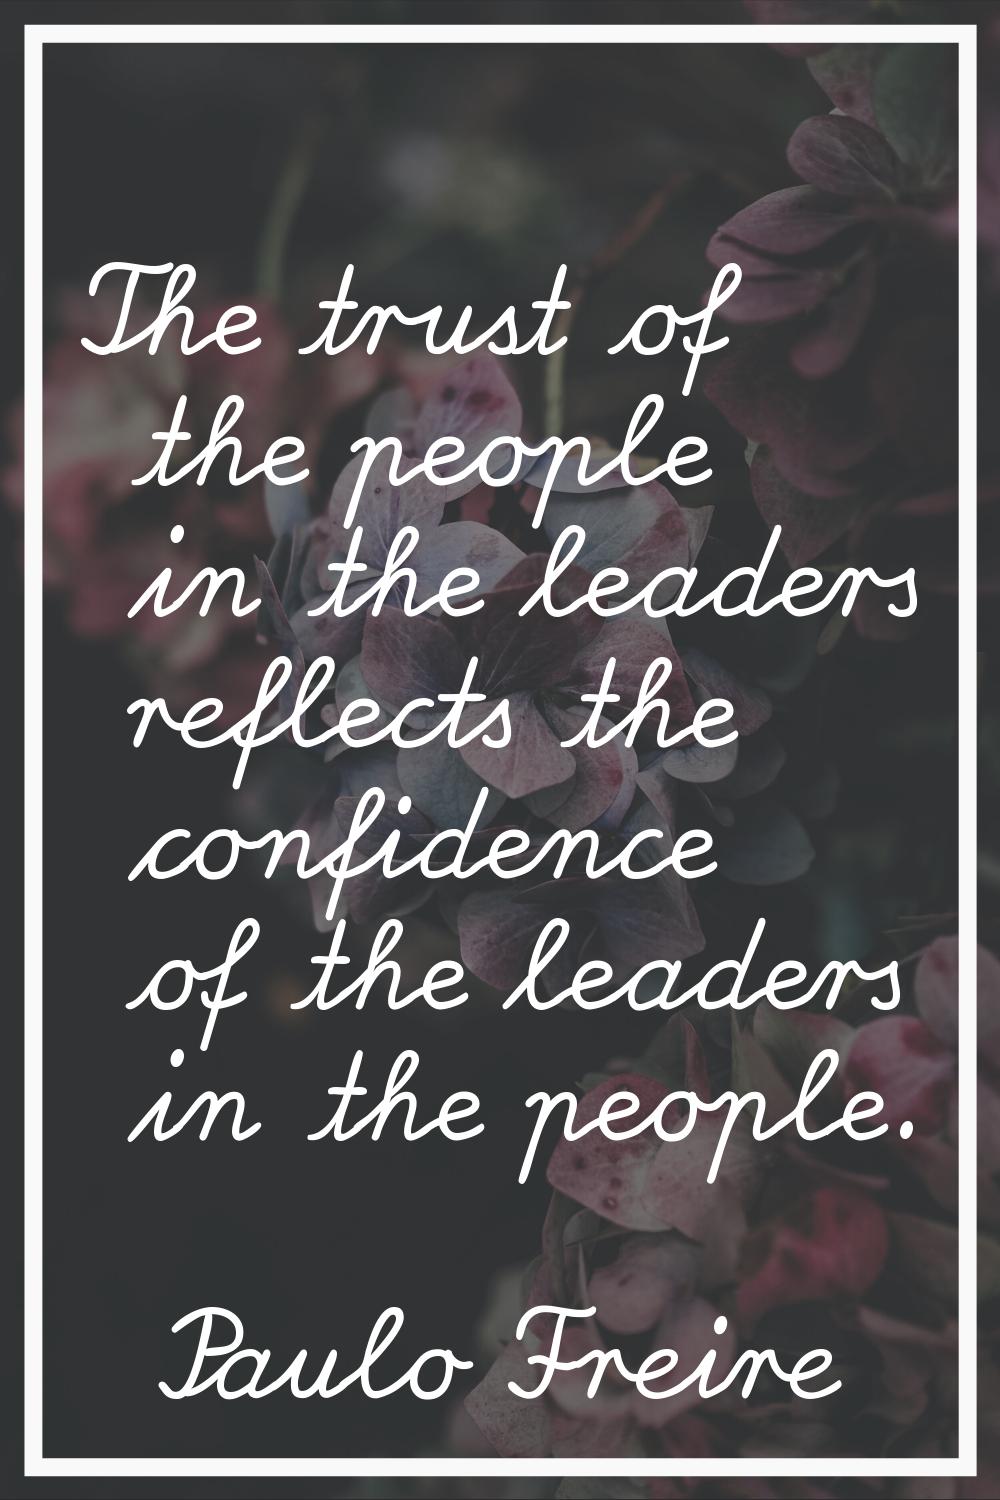 The trust of the people in the leaders reflects the confidence of the leaders in the people.